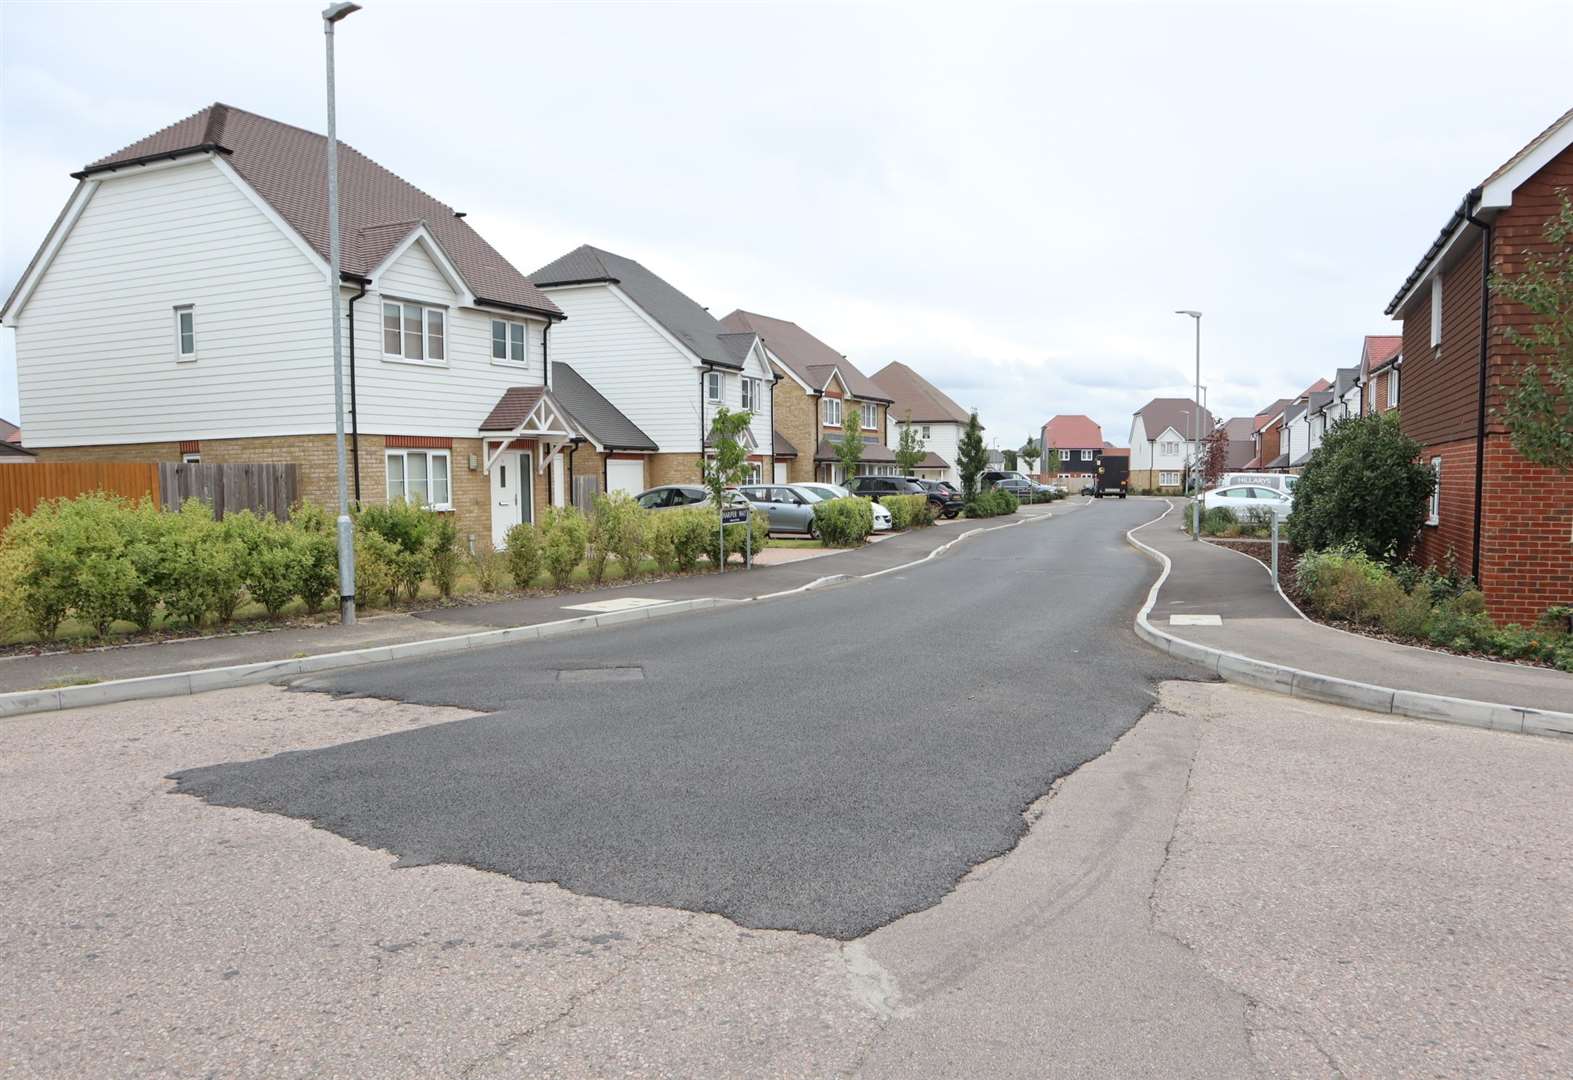 Patched road in Eveas Drive, Heron Fields, Great Easthall, Murston, Sittingbourne